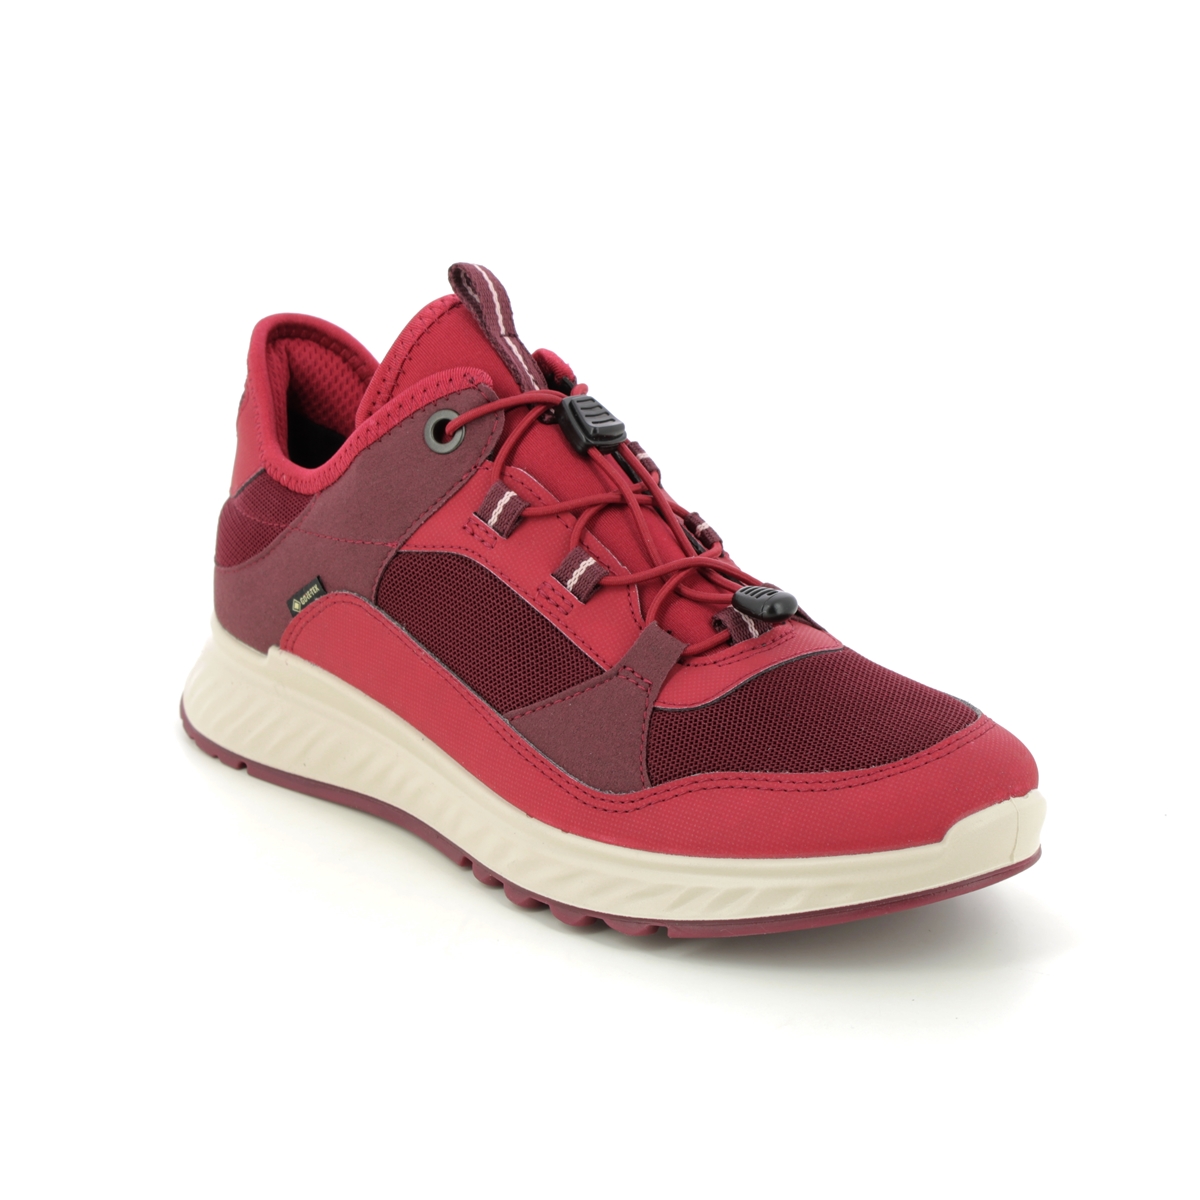 ECCO Exostride Gore Dark Red Womens Walking Shoes 835333-60405 in a Plain Textile in Size 37